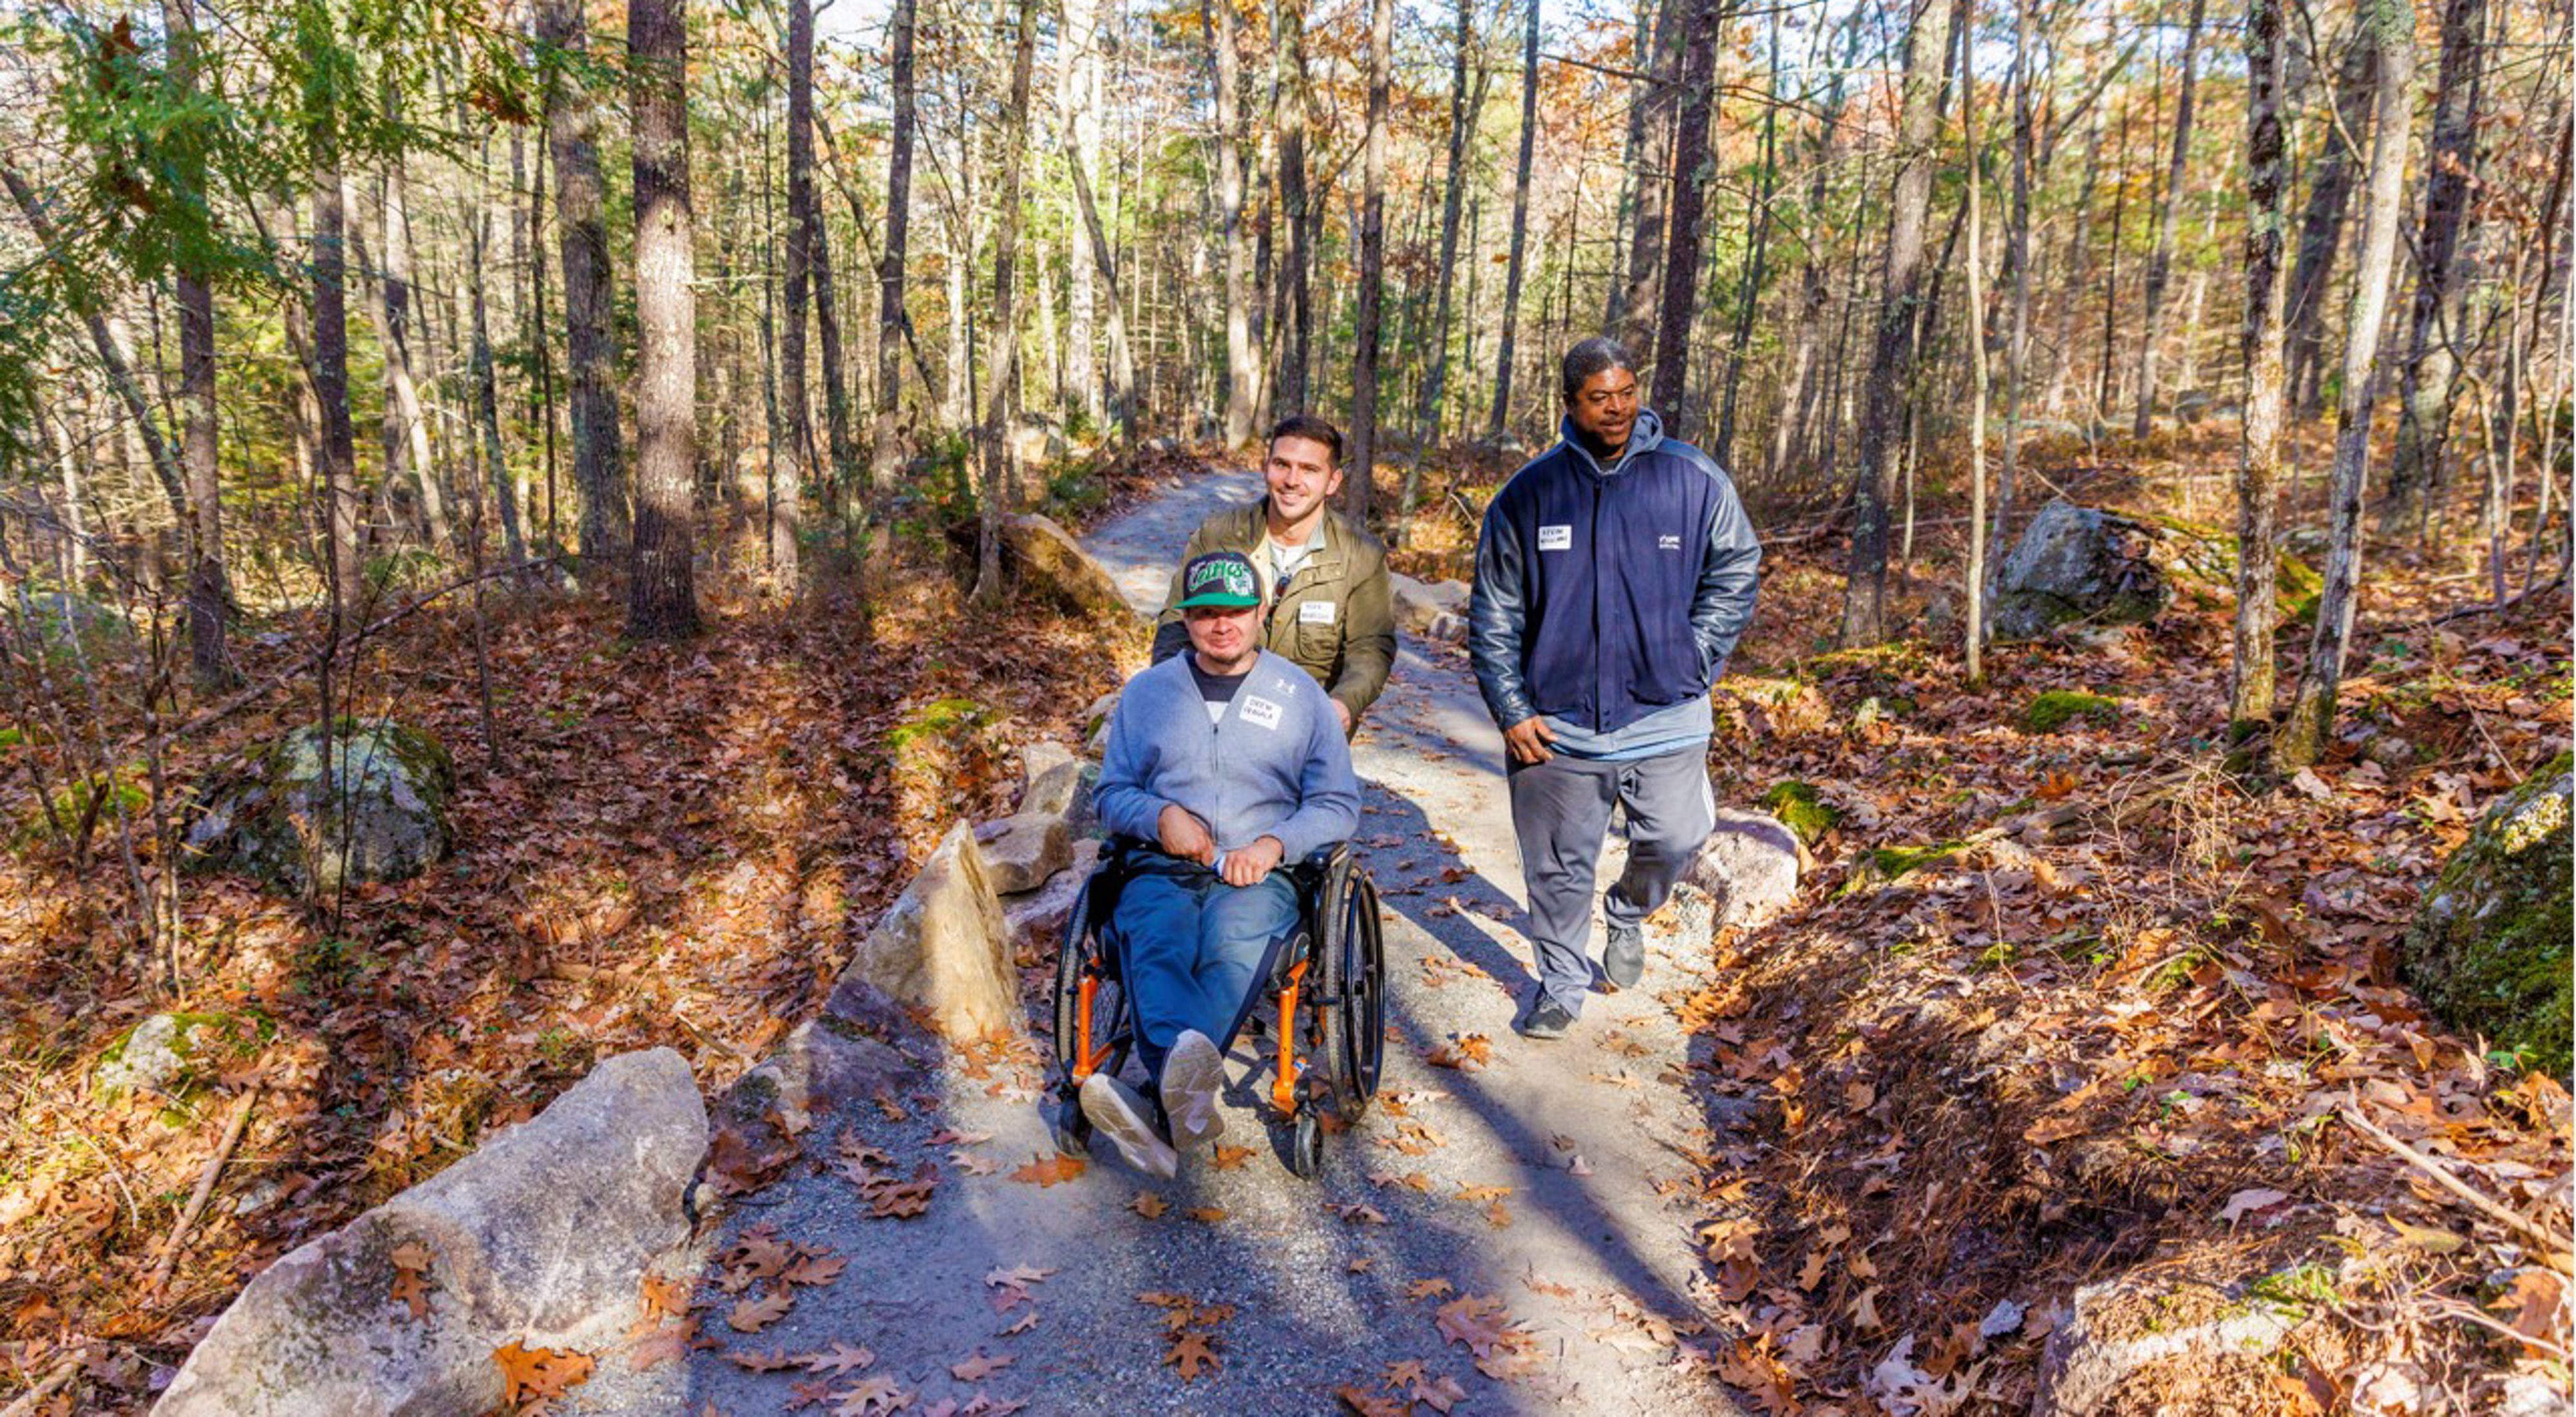 A man and his friend push another man using a wheelchair down a flat, winding path in the woods.